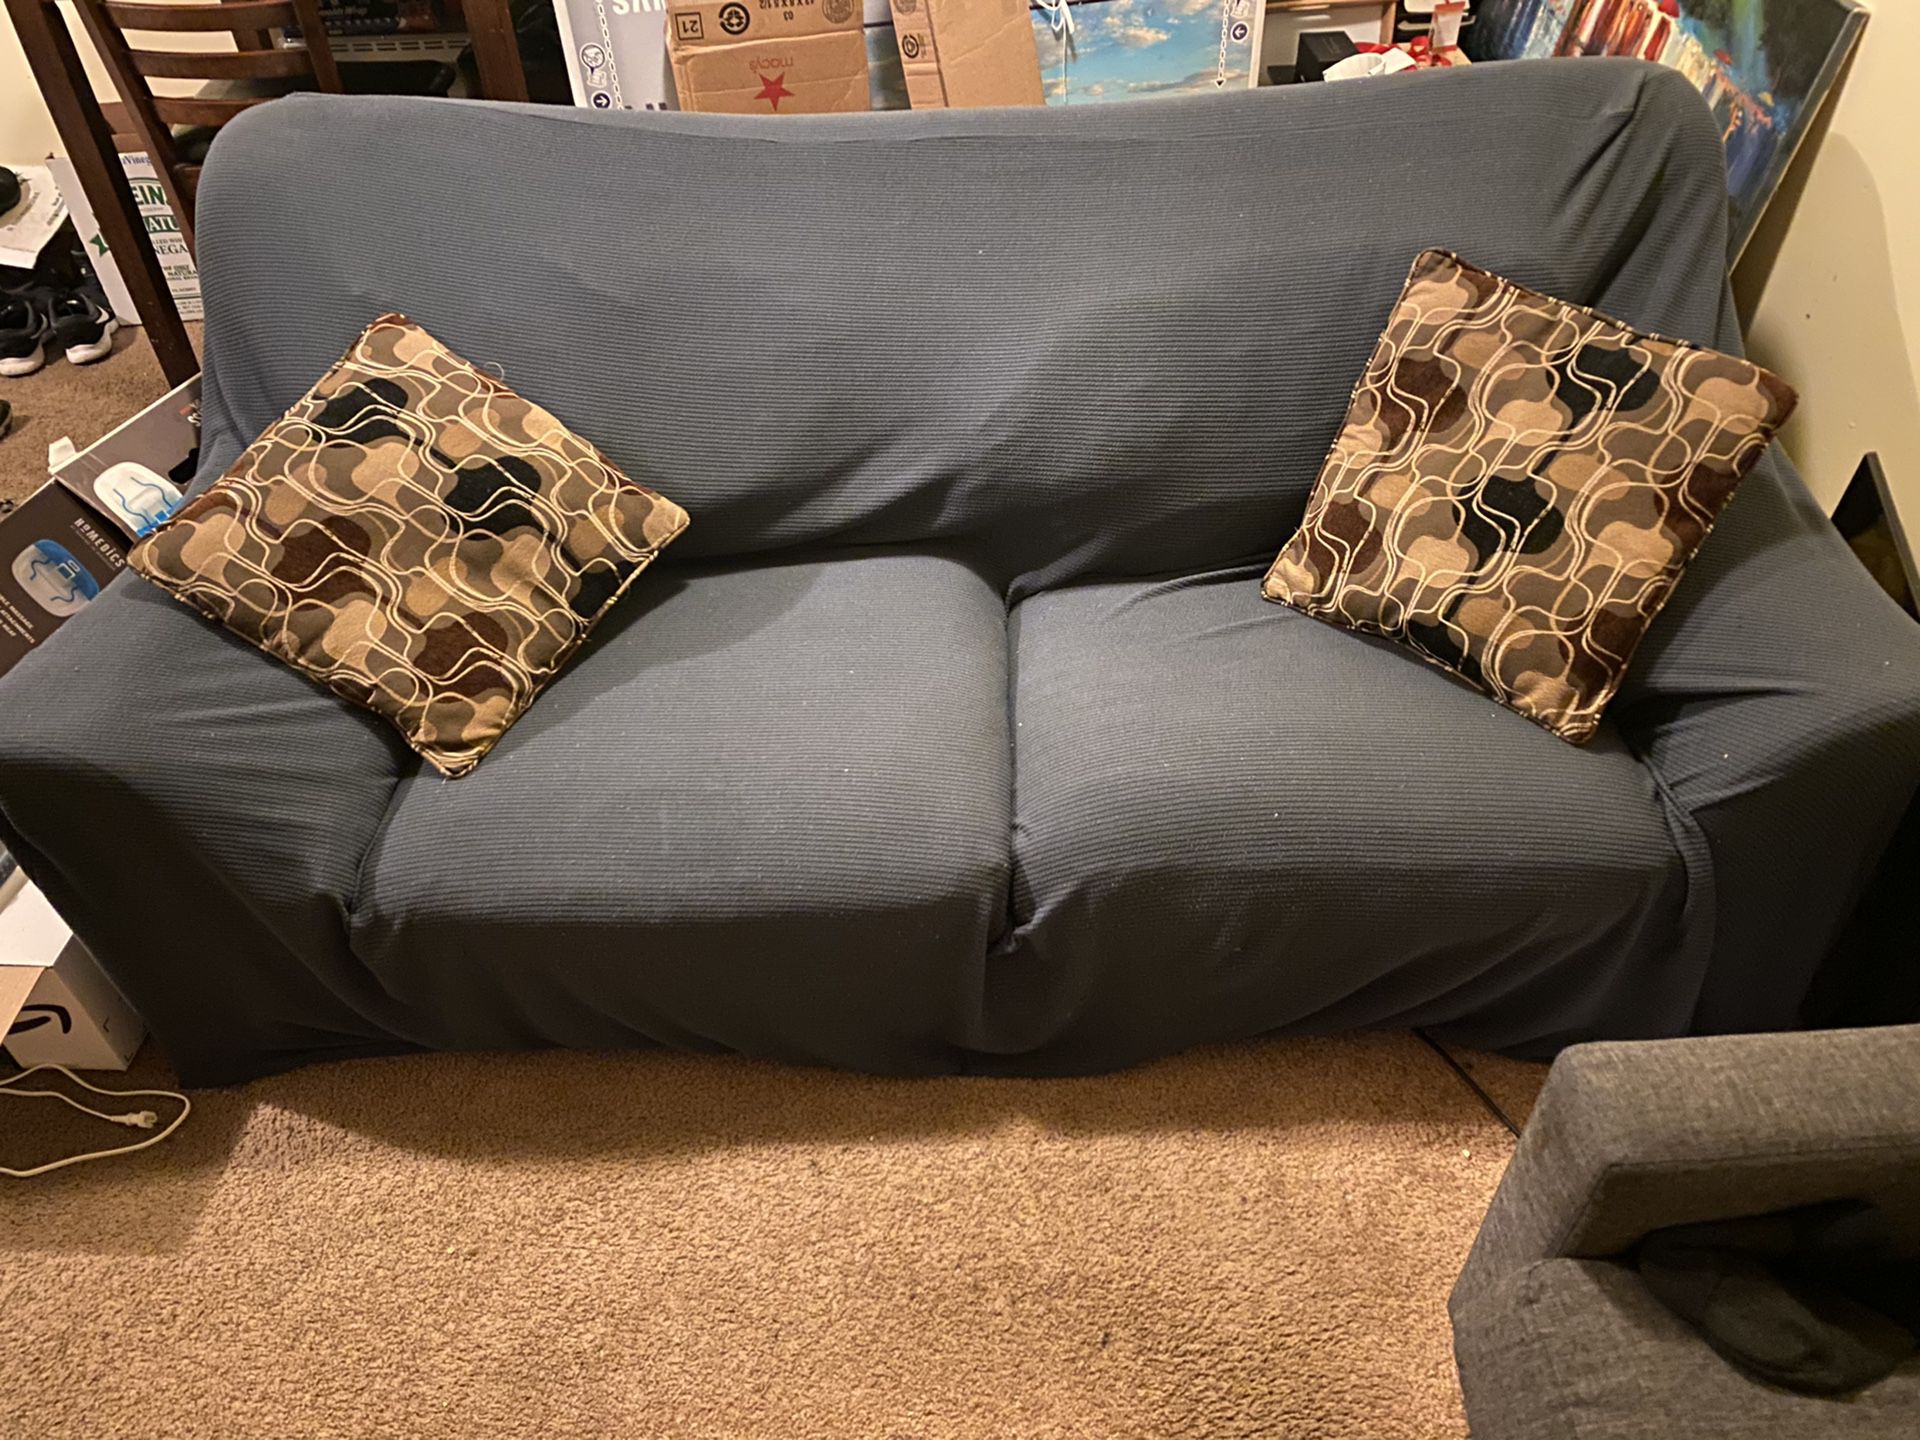 Sofa/couch